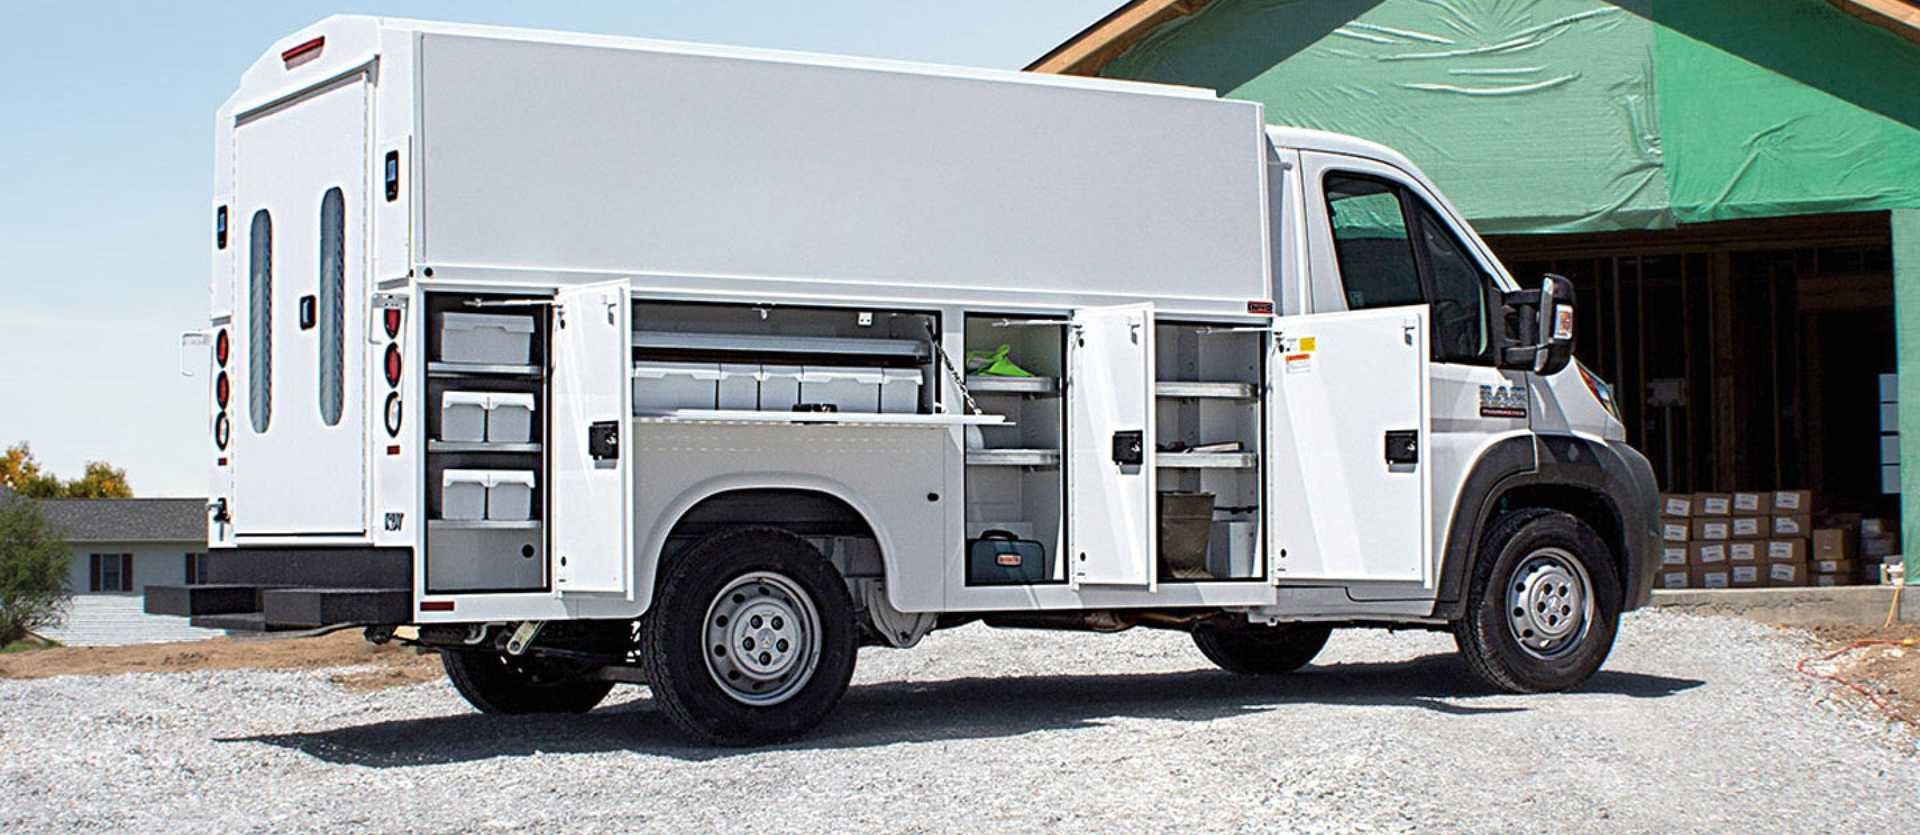 ProMaster 3500 Chassis Cab | 3500 | Auto Truck Review